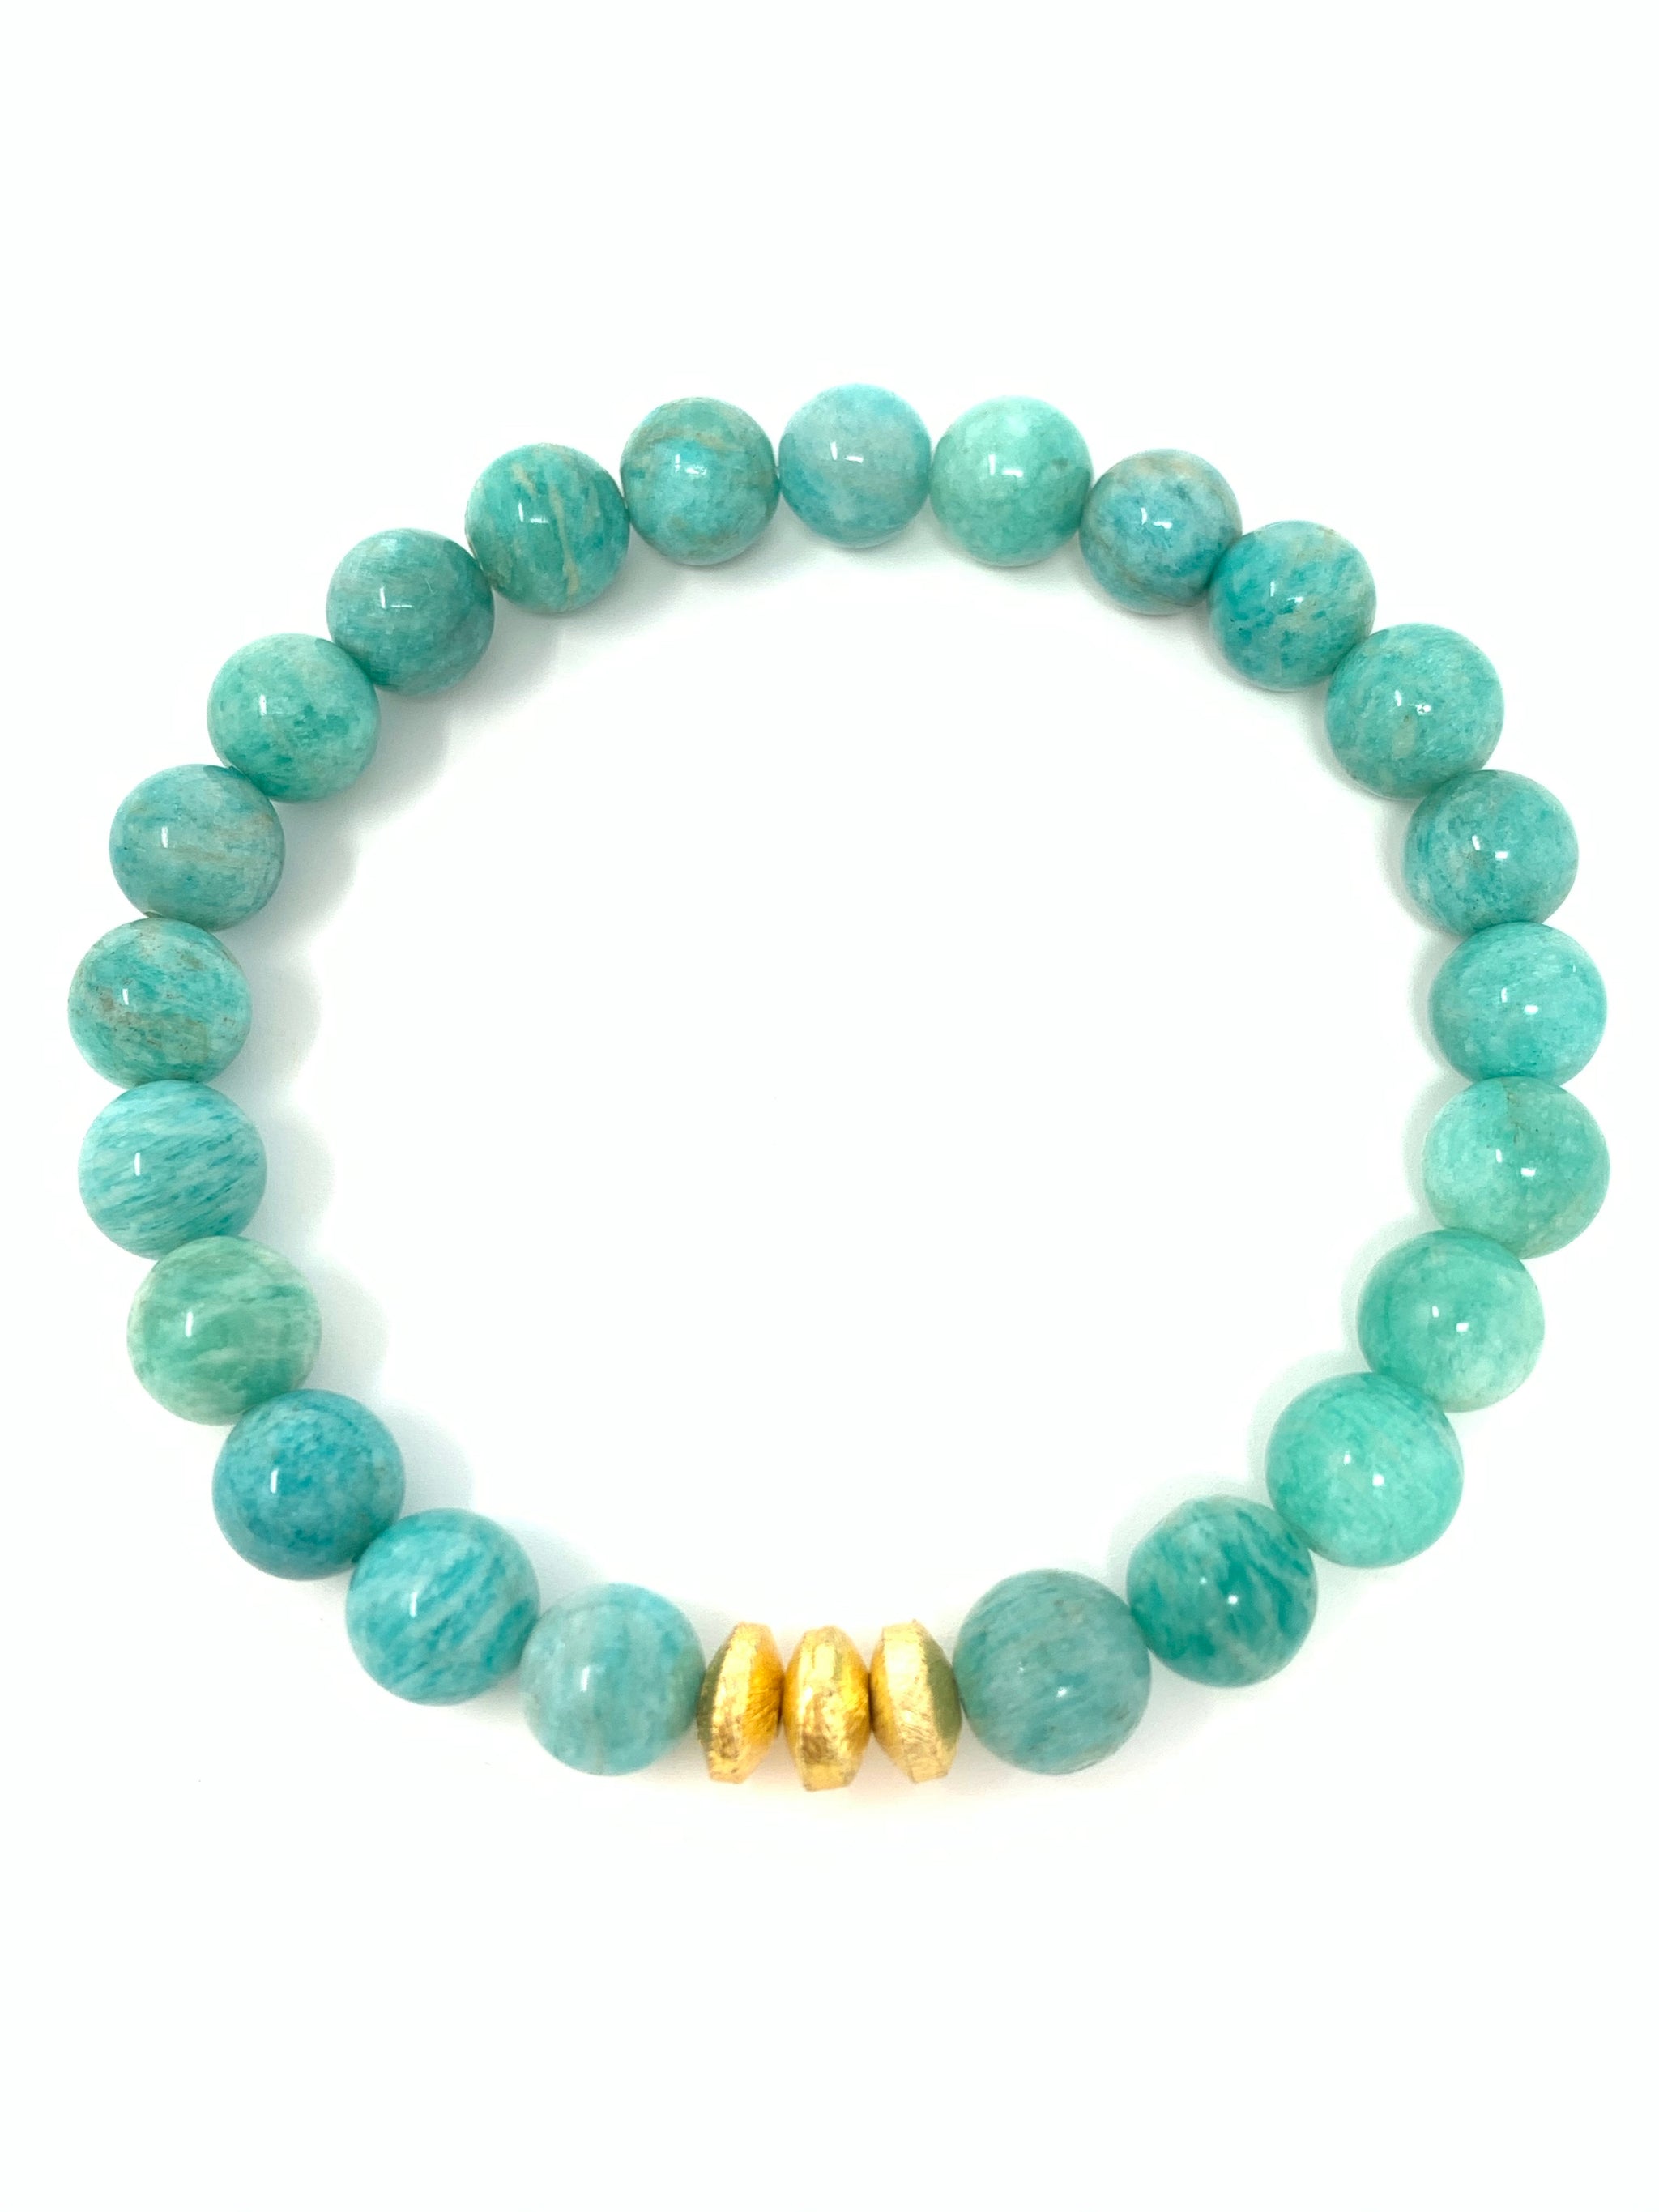 FEARLESS ~ POSITIVE ENERGY FLOW ~ COMMUNICATION; African Amazonite